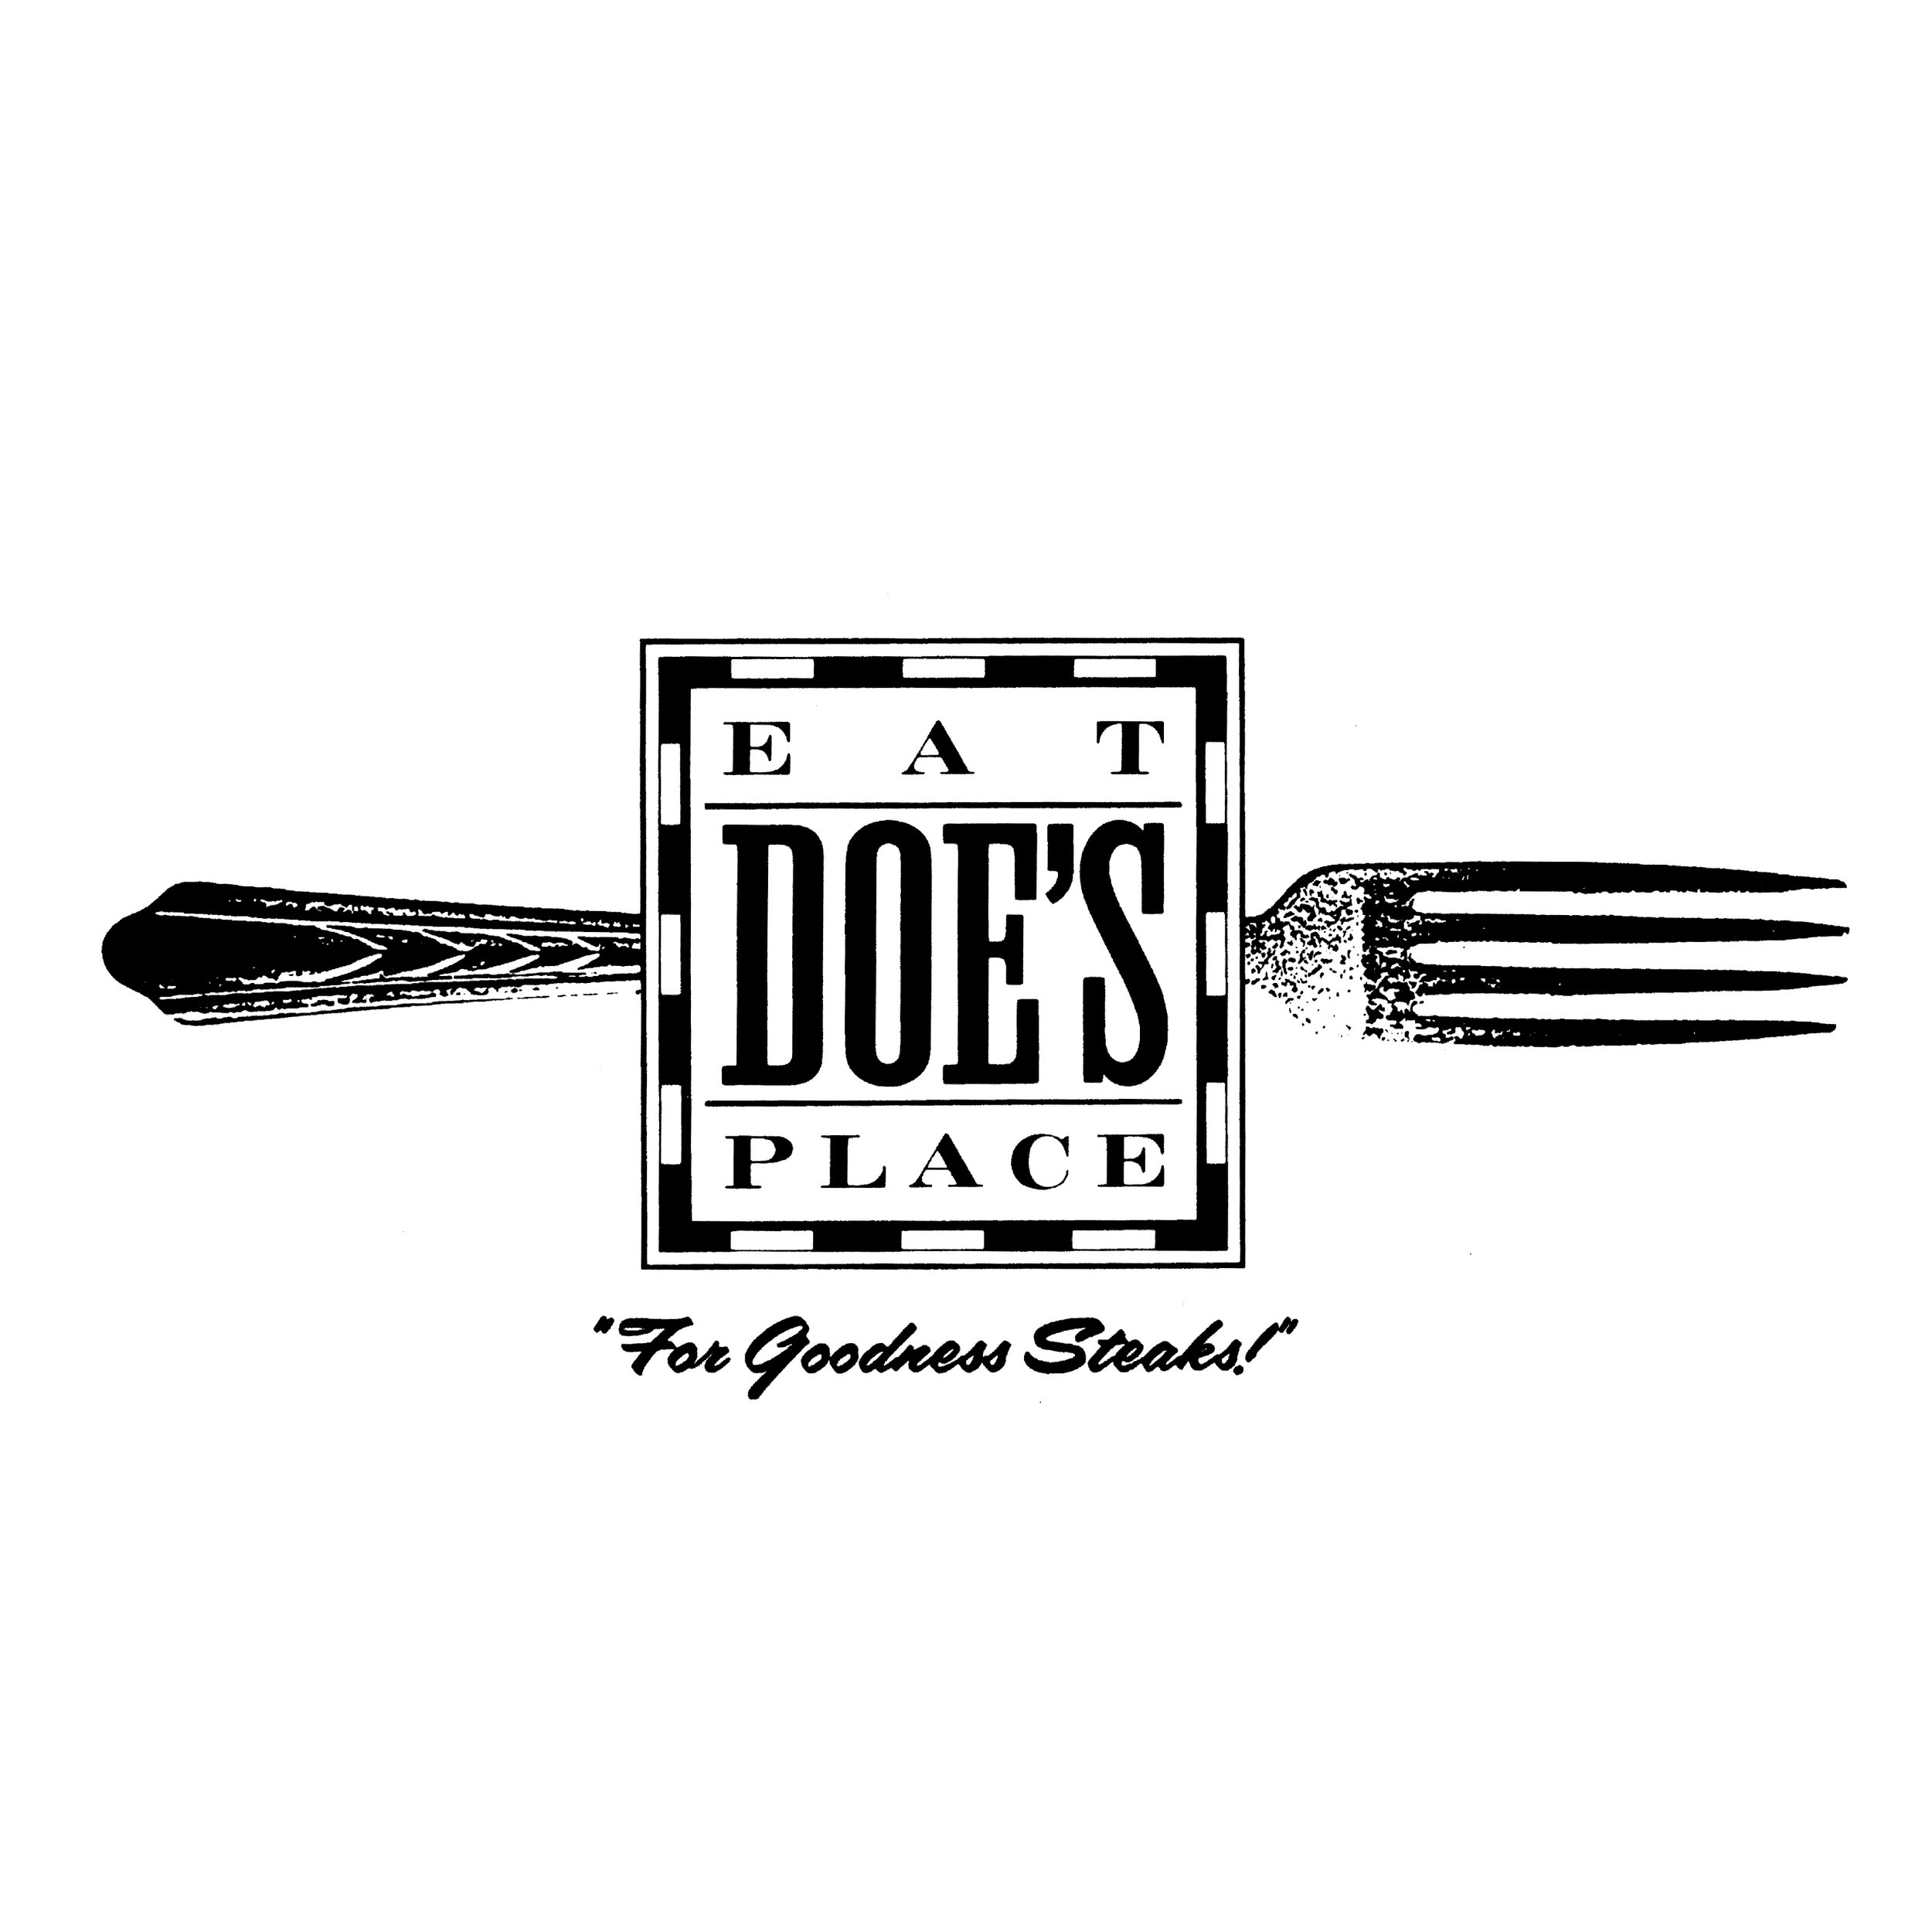  Original Does Eat Place Memphis logo  Branding creative and design by Chuck Mitchell  Elements later adapted for Blues City Cafe  Beale Street Memphis, Tennessee 